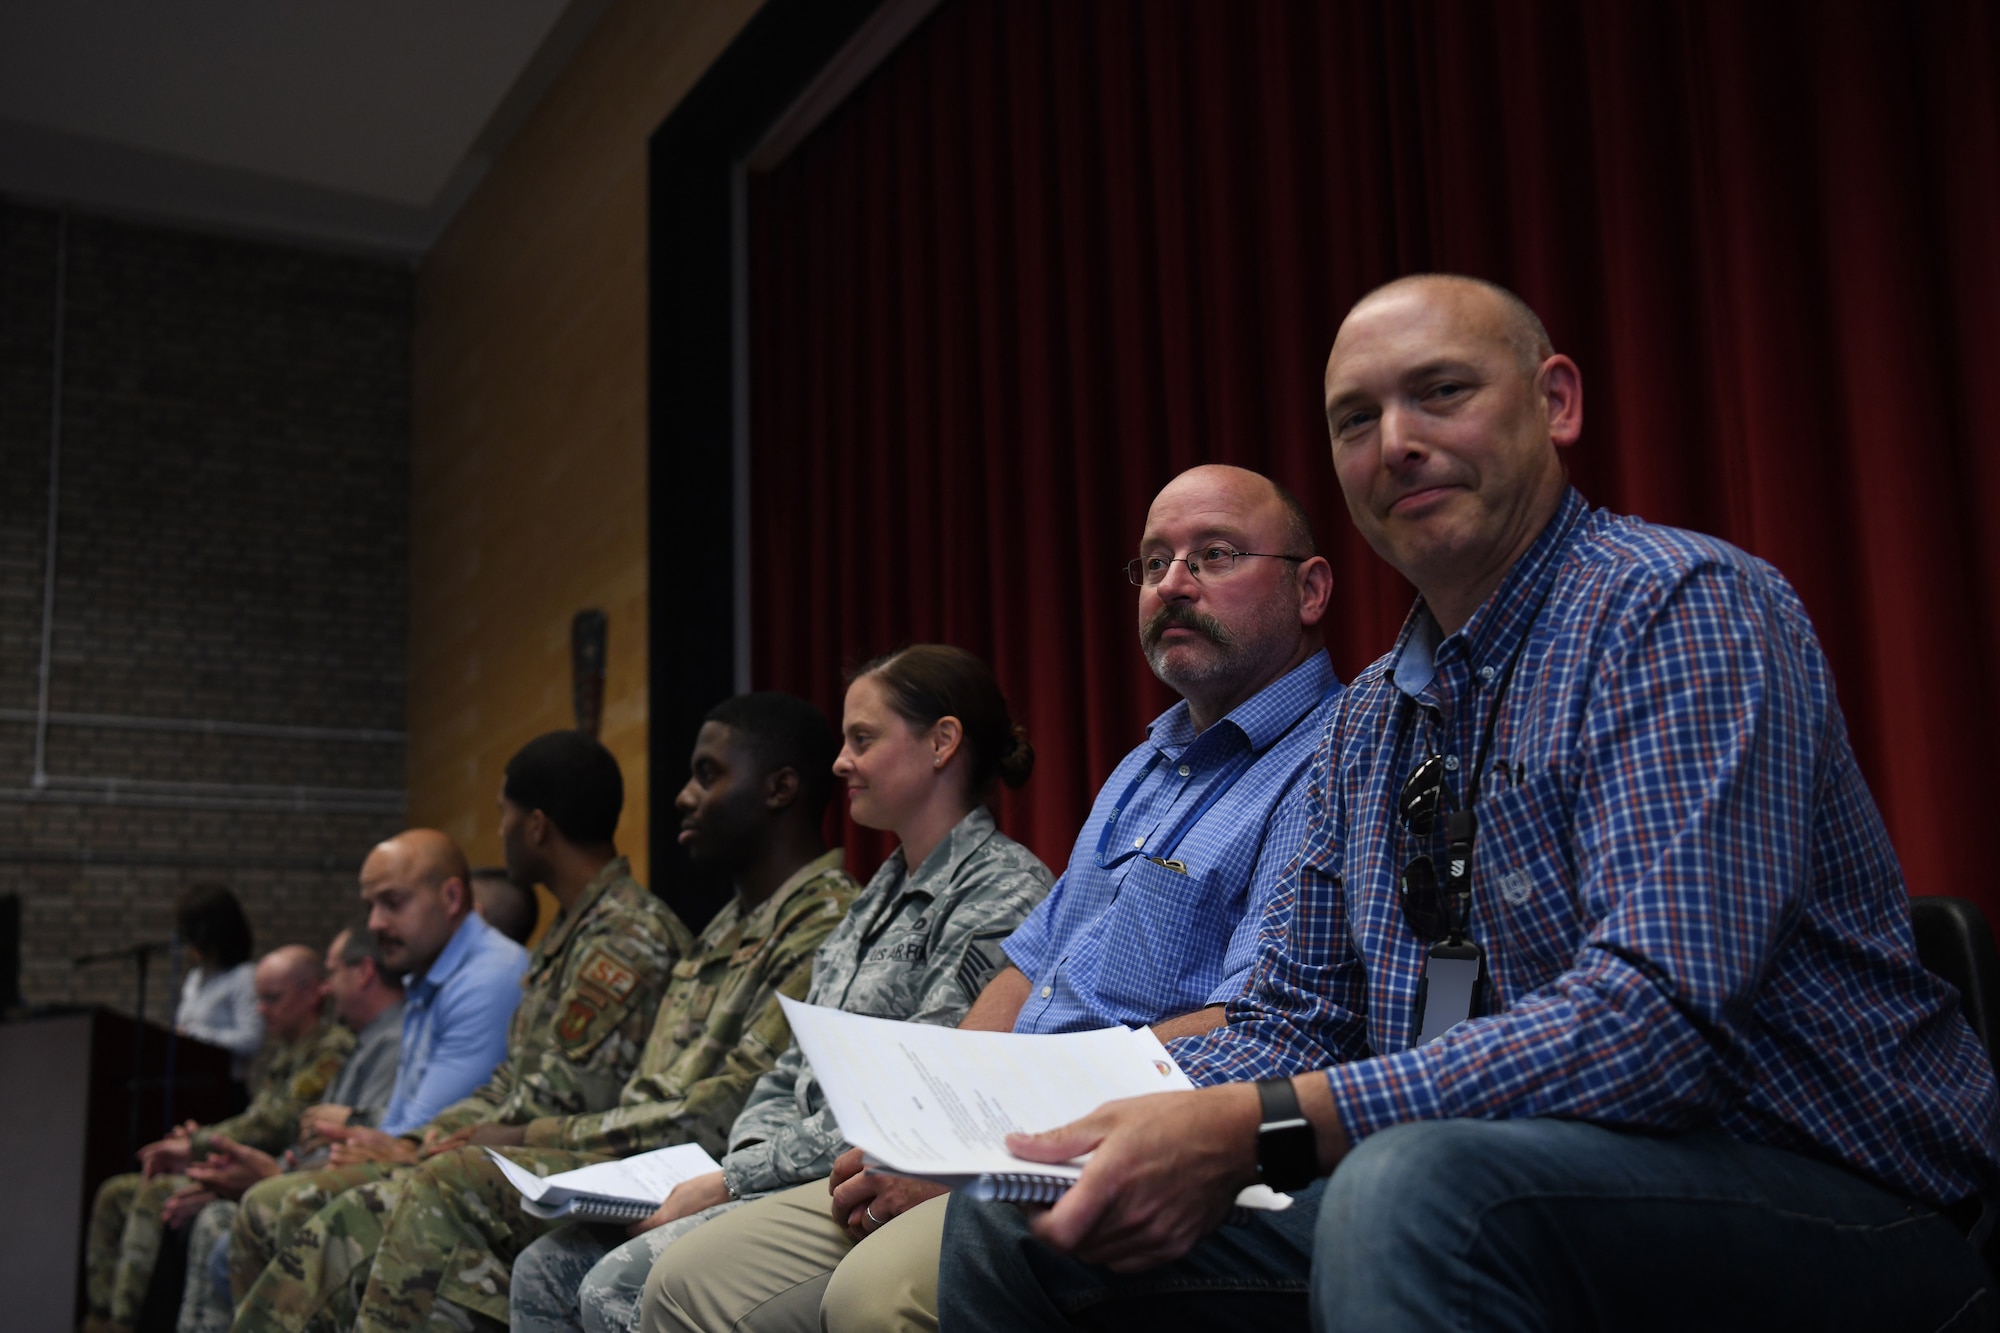 Representatives from the Liberty Wing’s helping agencies prepare to answer questions on a panel during a forum for teachers at Royal Air Force Lakenheath, England, Aug. 29, 2019. Panelist experts provided guidance on matters of available medical services for civilians, health and safety measures for students, agency workshops and base communications. (U.S. Air Force photo by Airman 1st Class Shanice Williams-Jones)